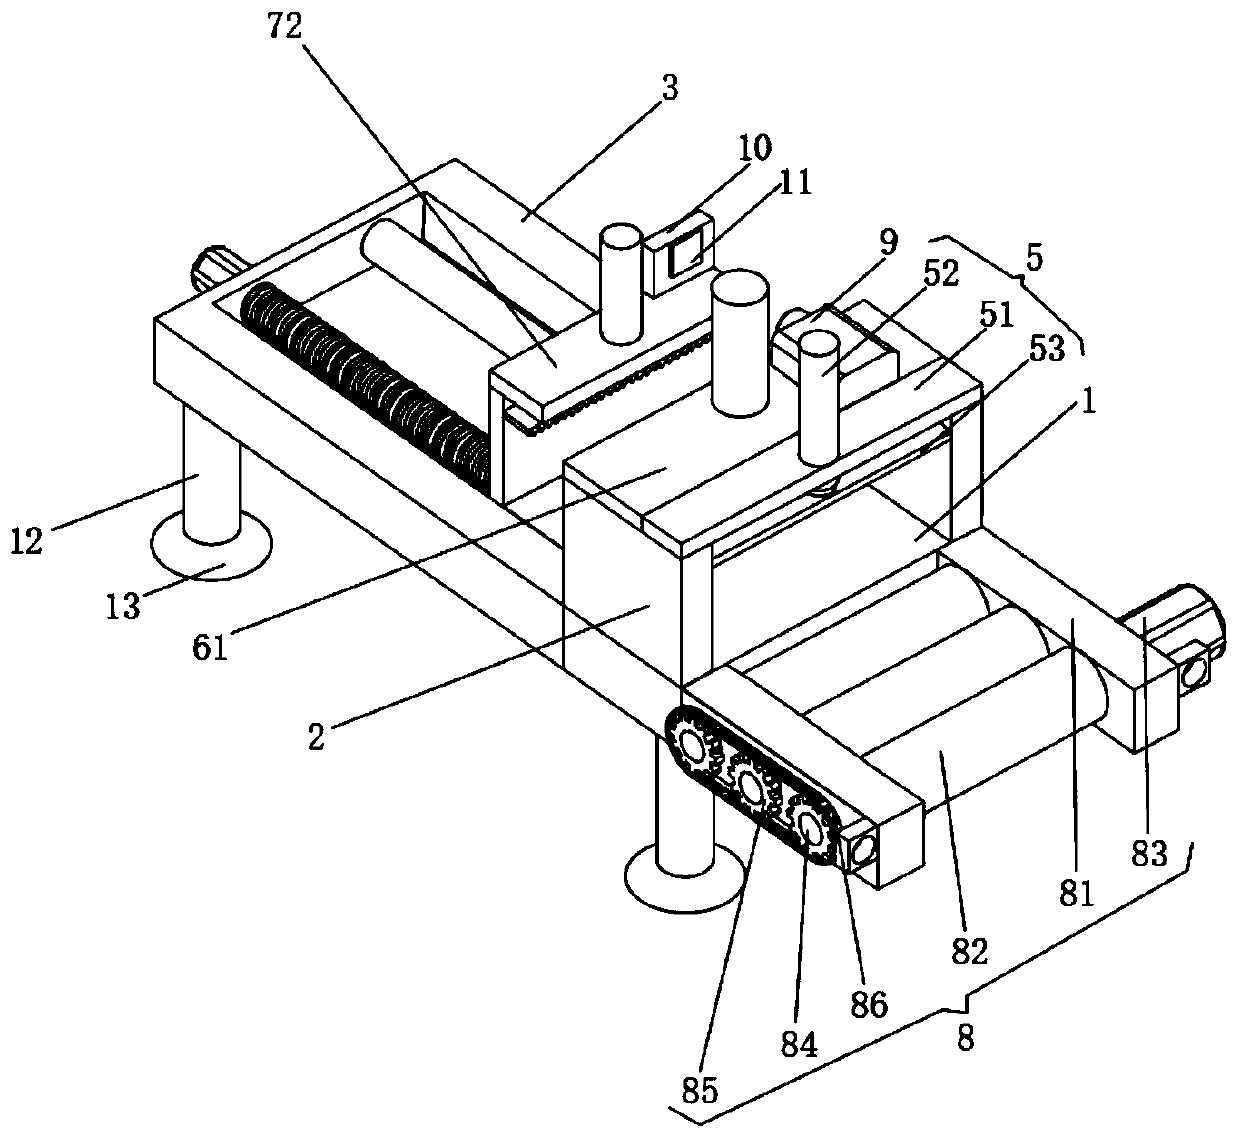 Fixed-length measuring device for saw cutting of sectional bars